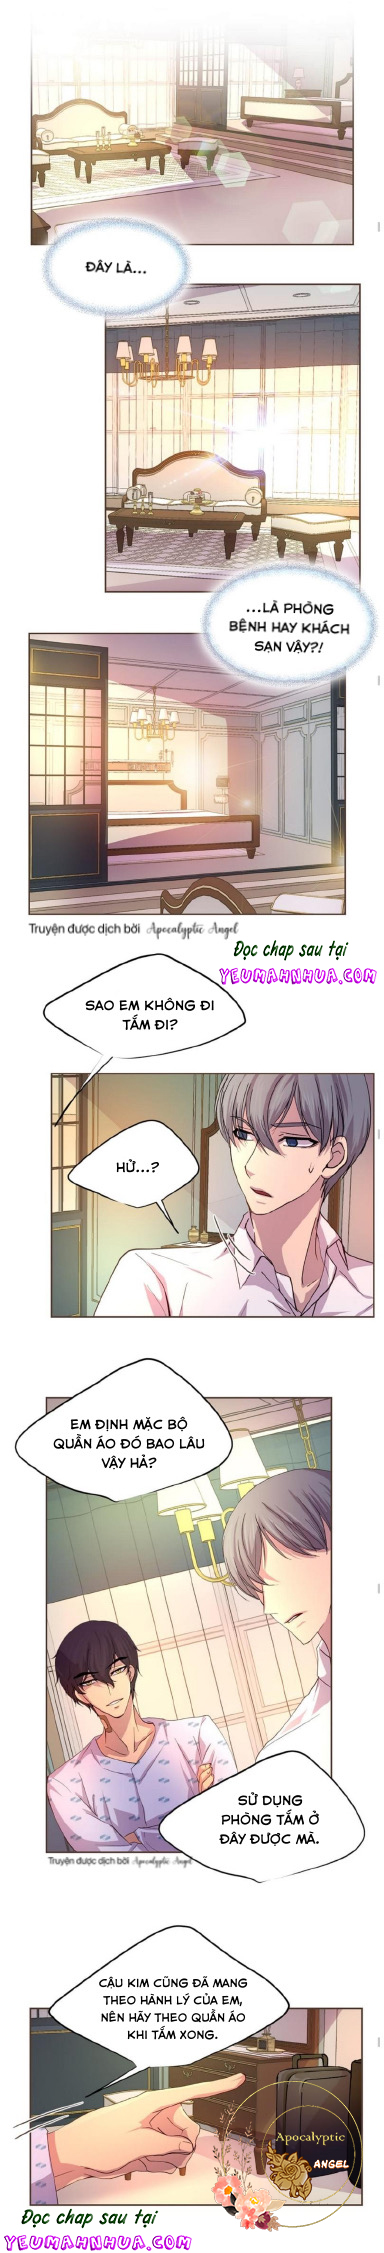 Giữa Em Thật Chặt (Hold Me Tight) Chapter 17 - Trang 12